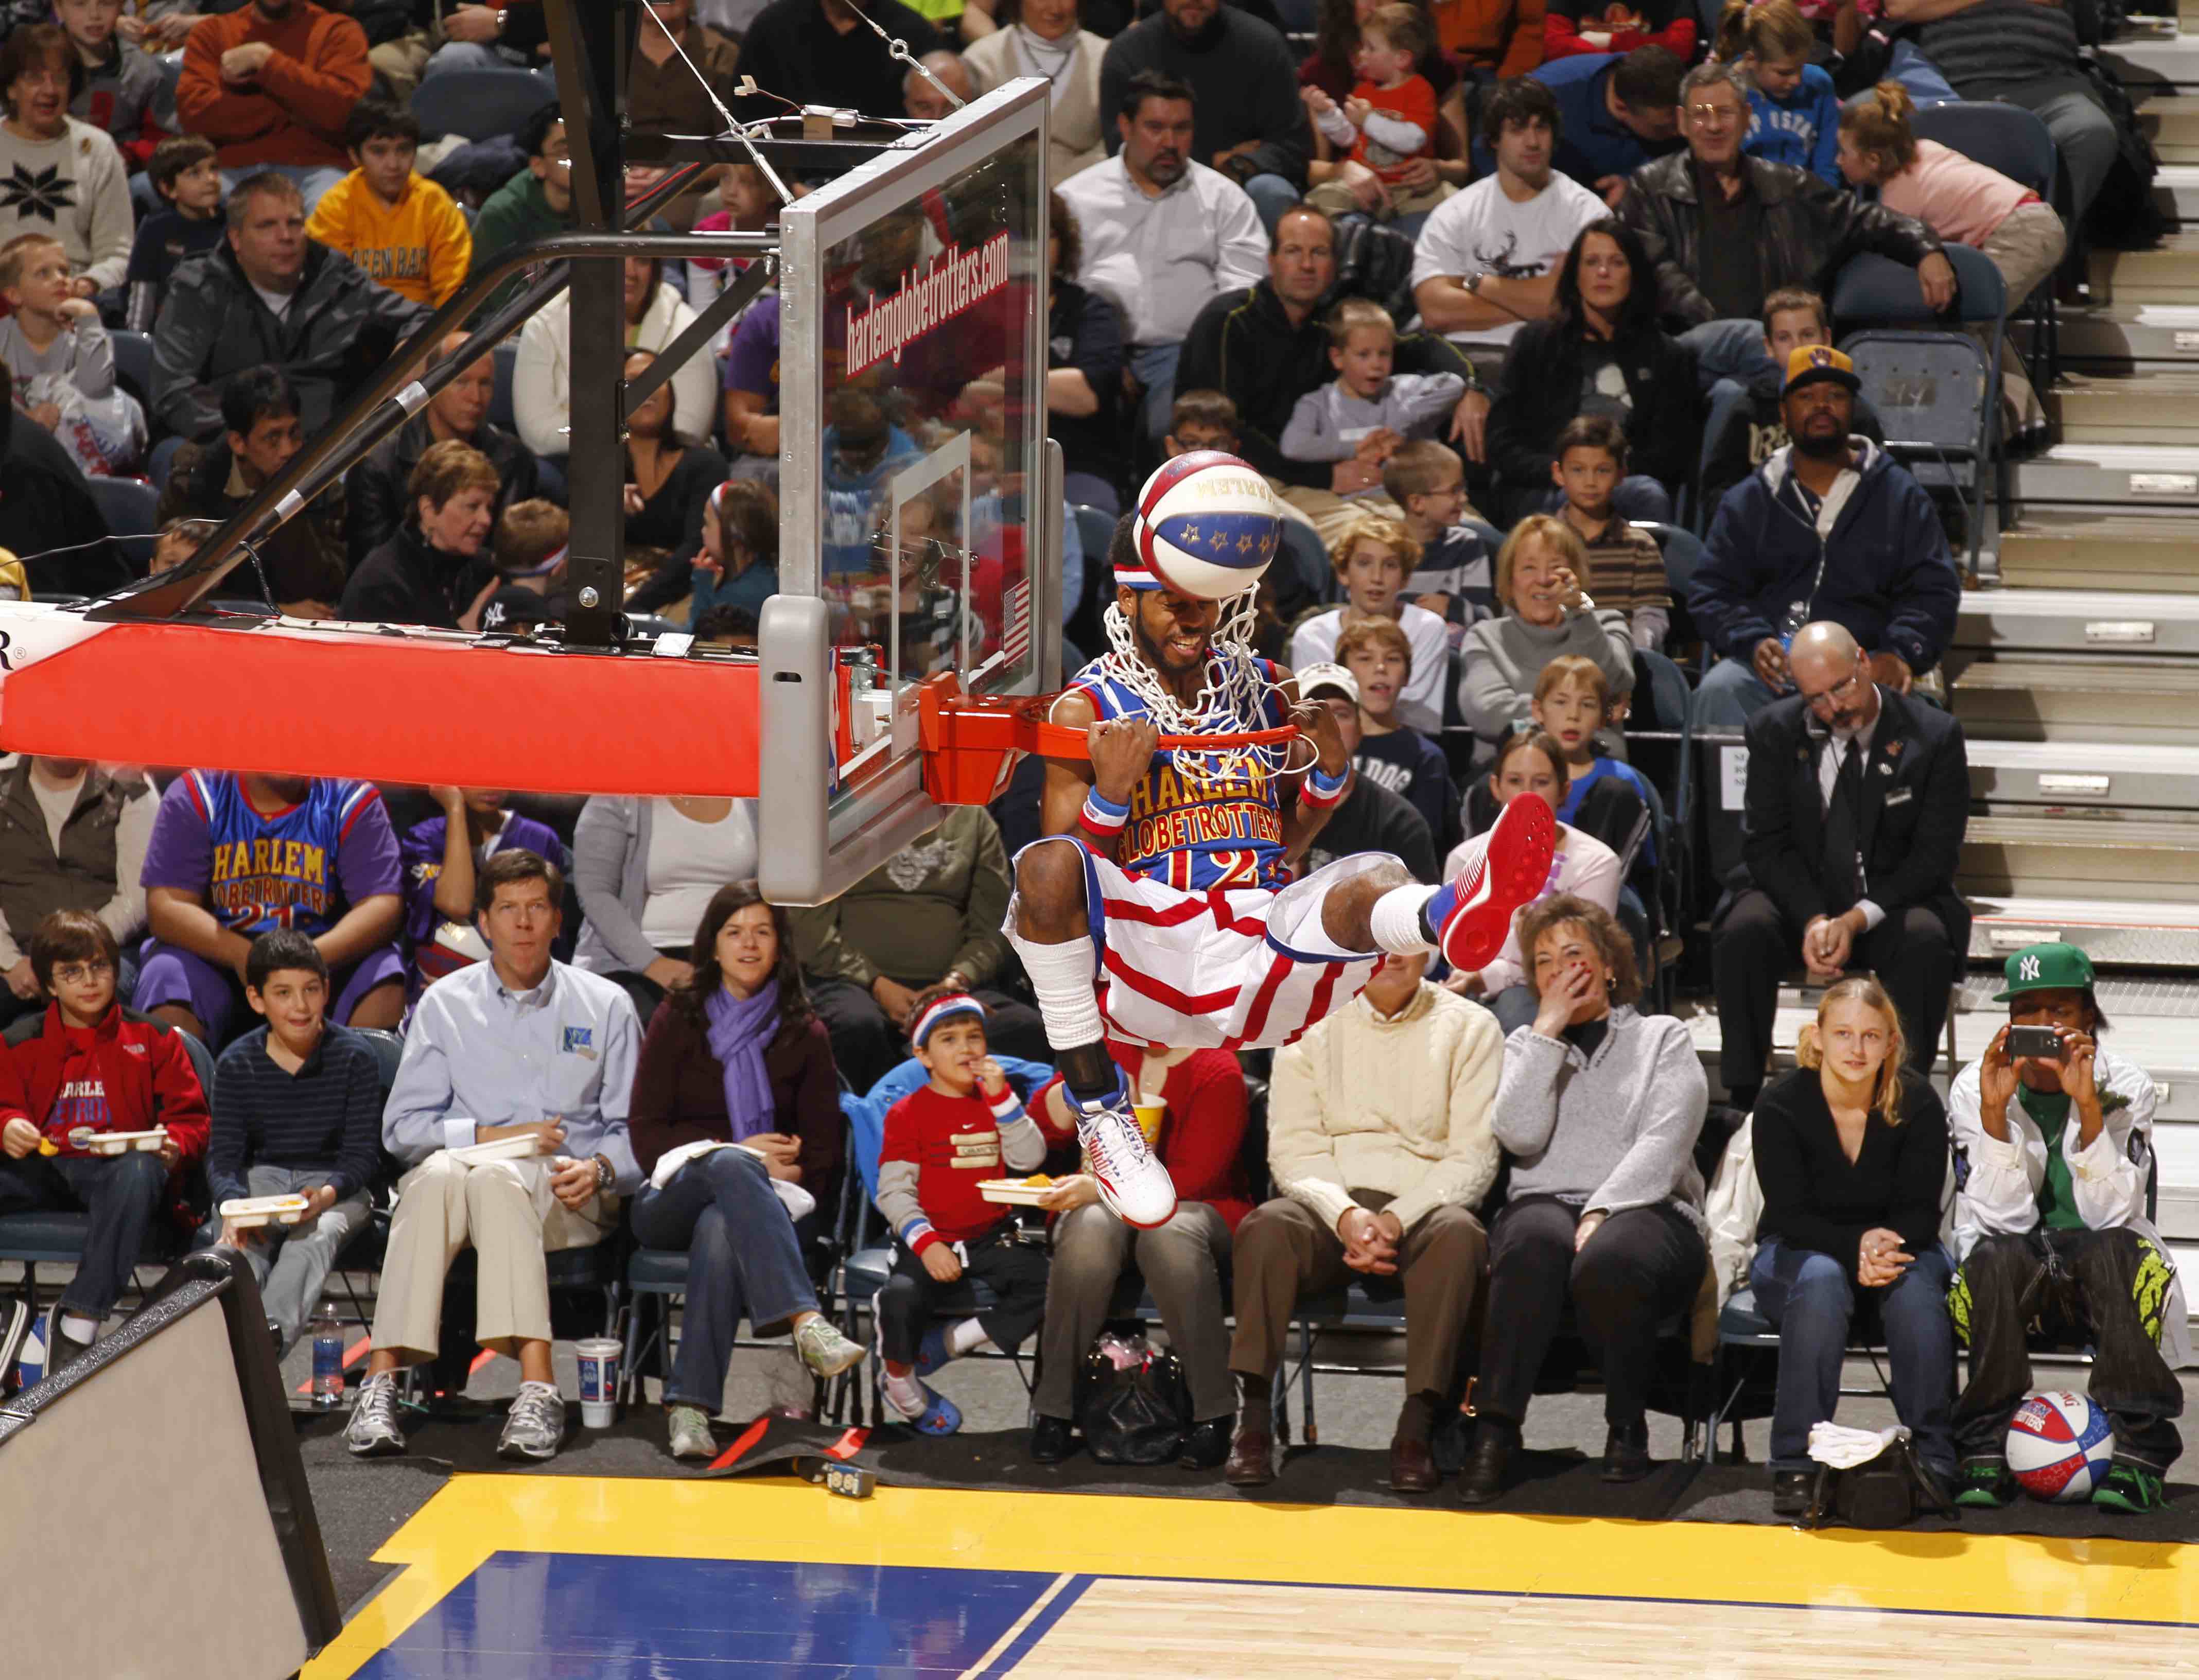 The Harlem Globetrotters entertain fans at the Bradley Center in Milwaukee, Wi., Friday, Dec, 31,2010. (Jeffrey Phelps for the Harlem Globtrotters)